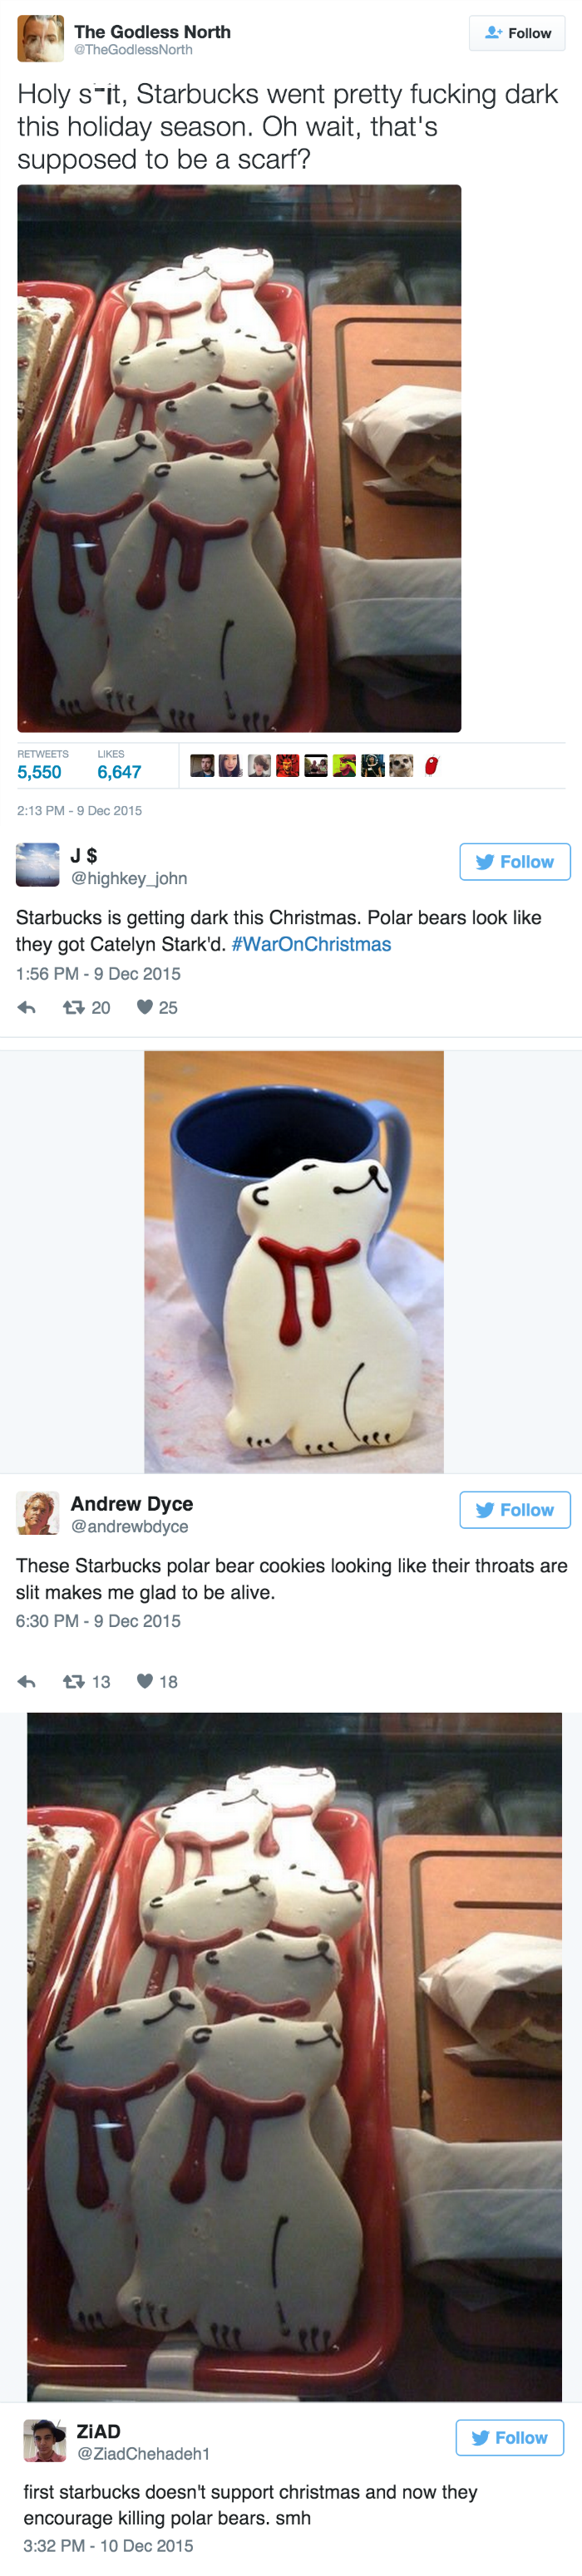 funny fail image you can't unsee Starbucks Polar Bear cookies with slit throats